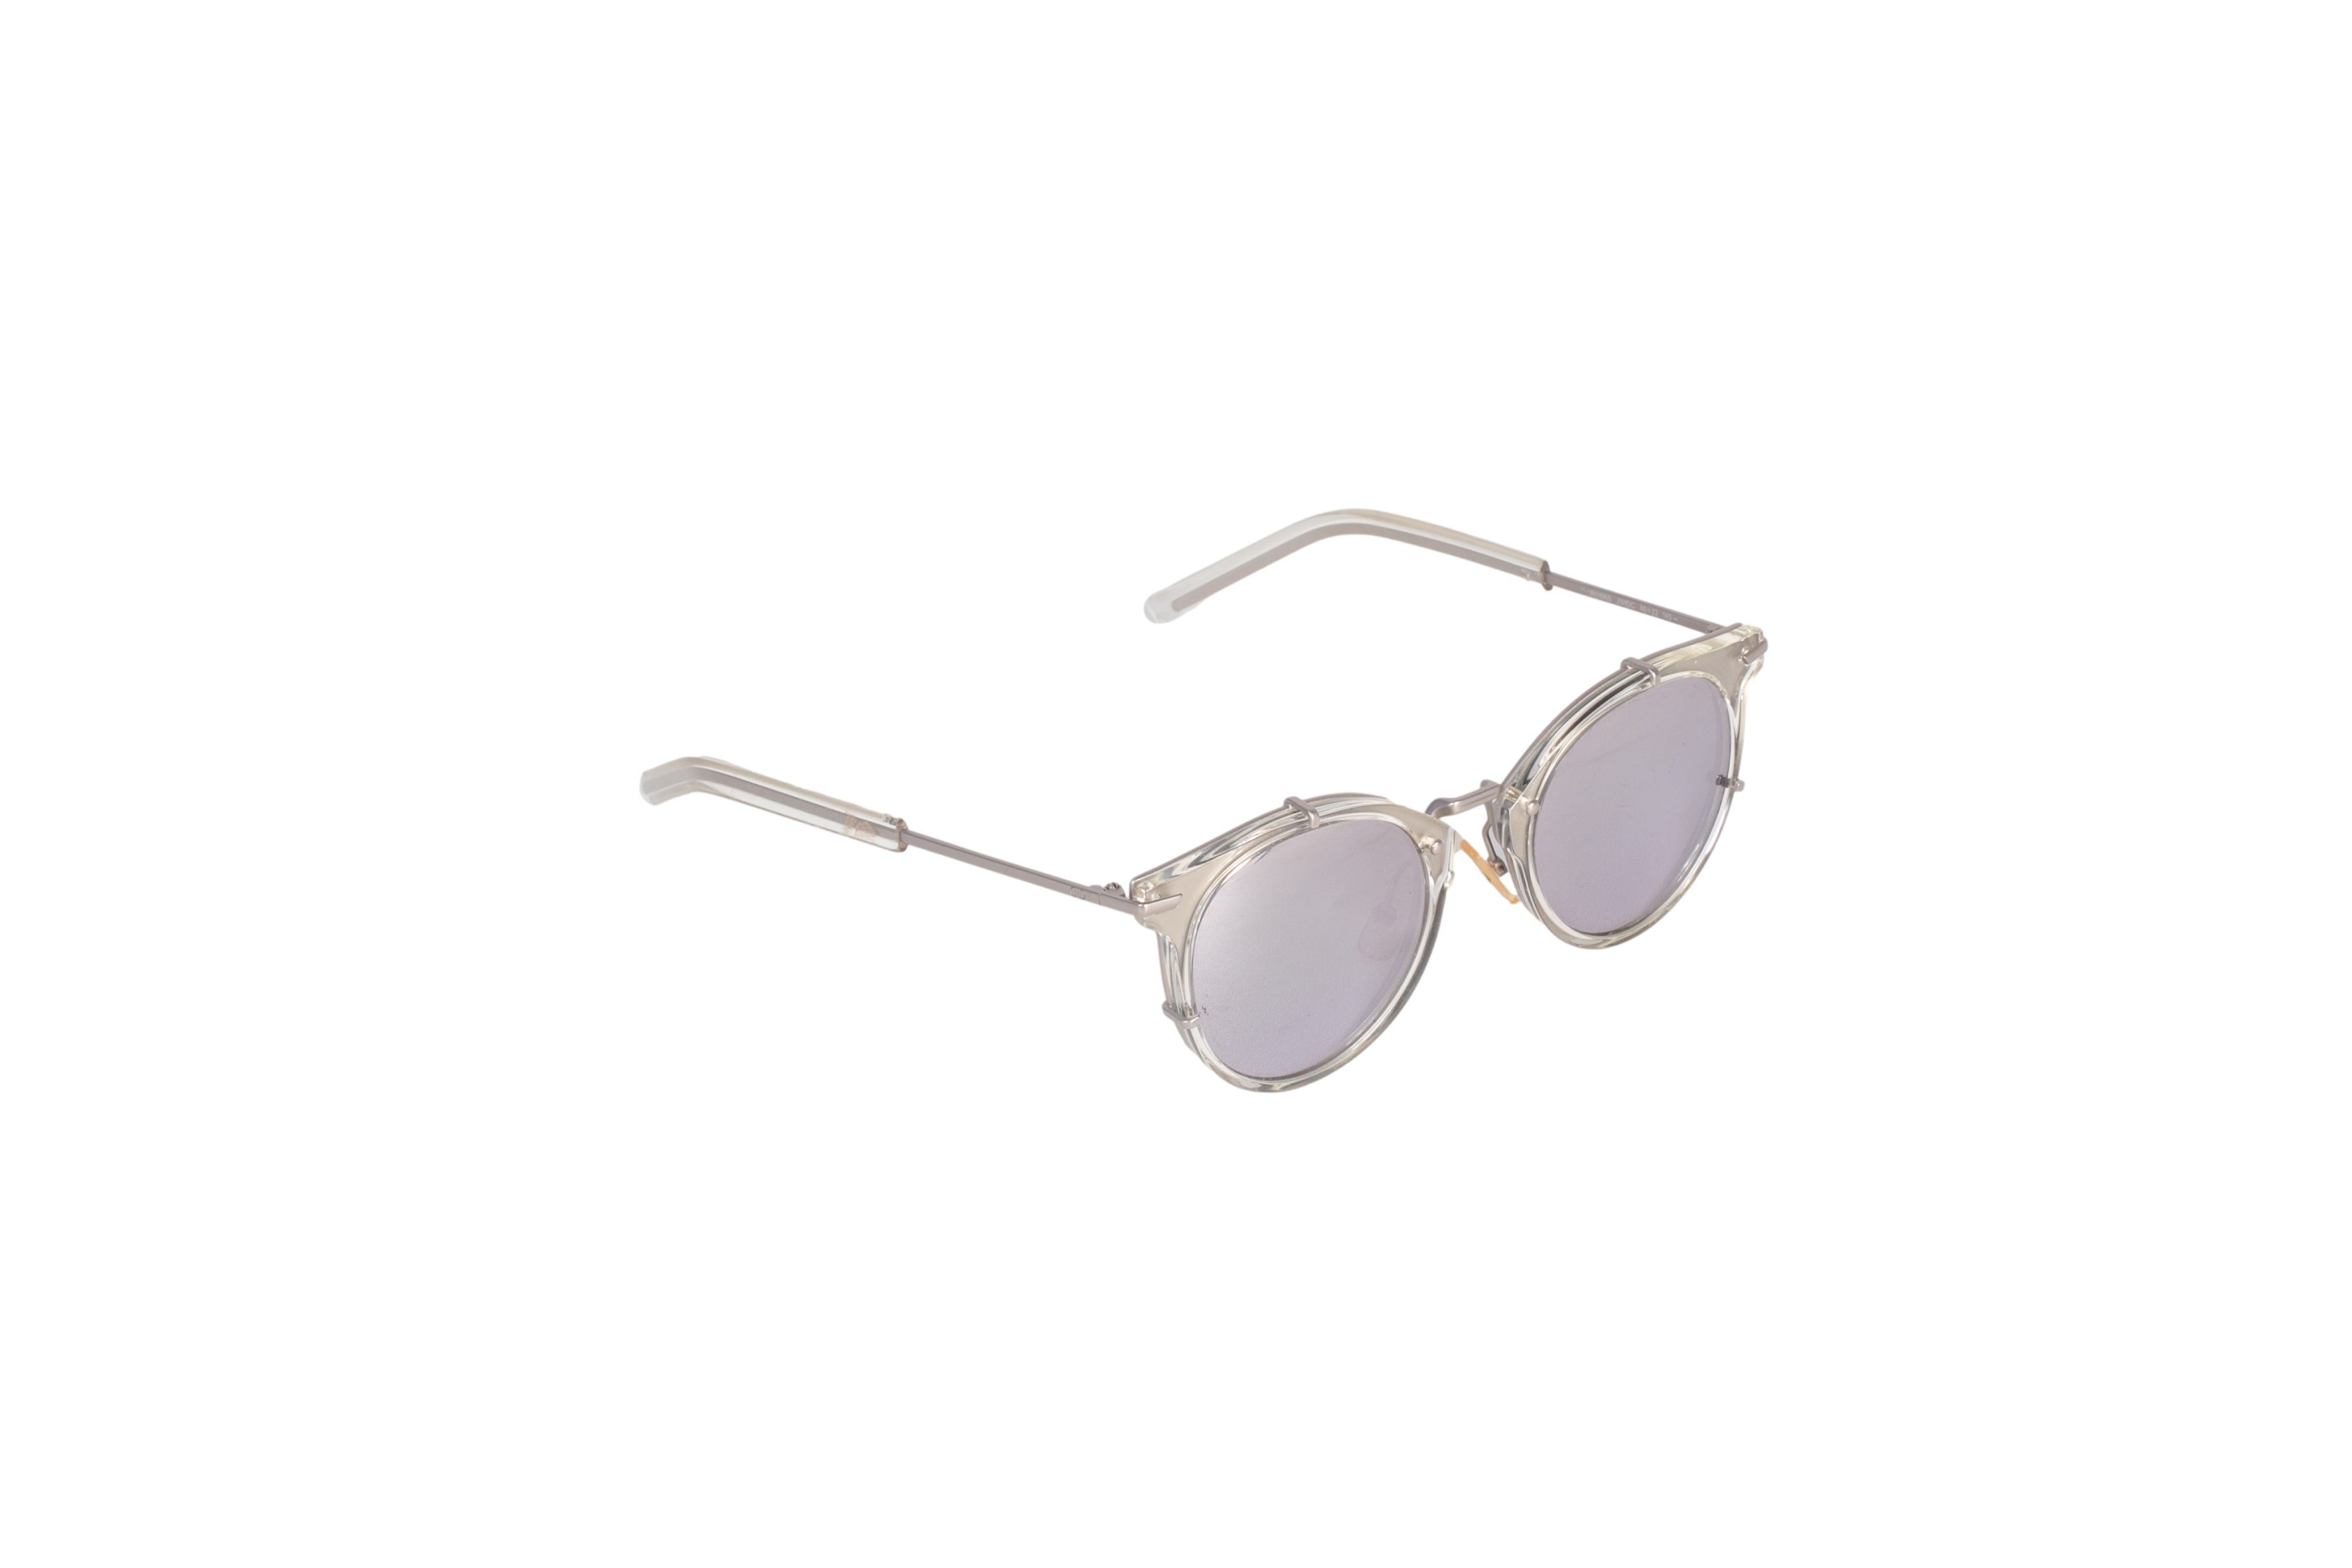 DESAPEGO THASSIA NAVES CHRISTIAN DIOR OCULOS HOMME 0196S ALL SILVER